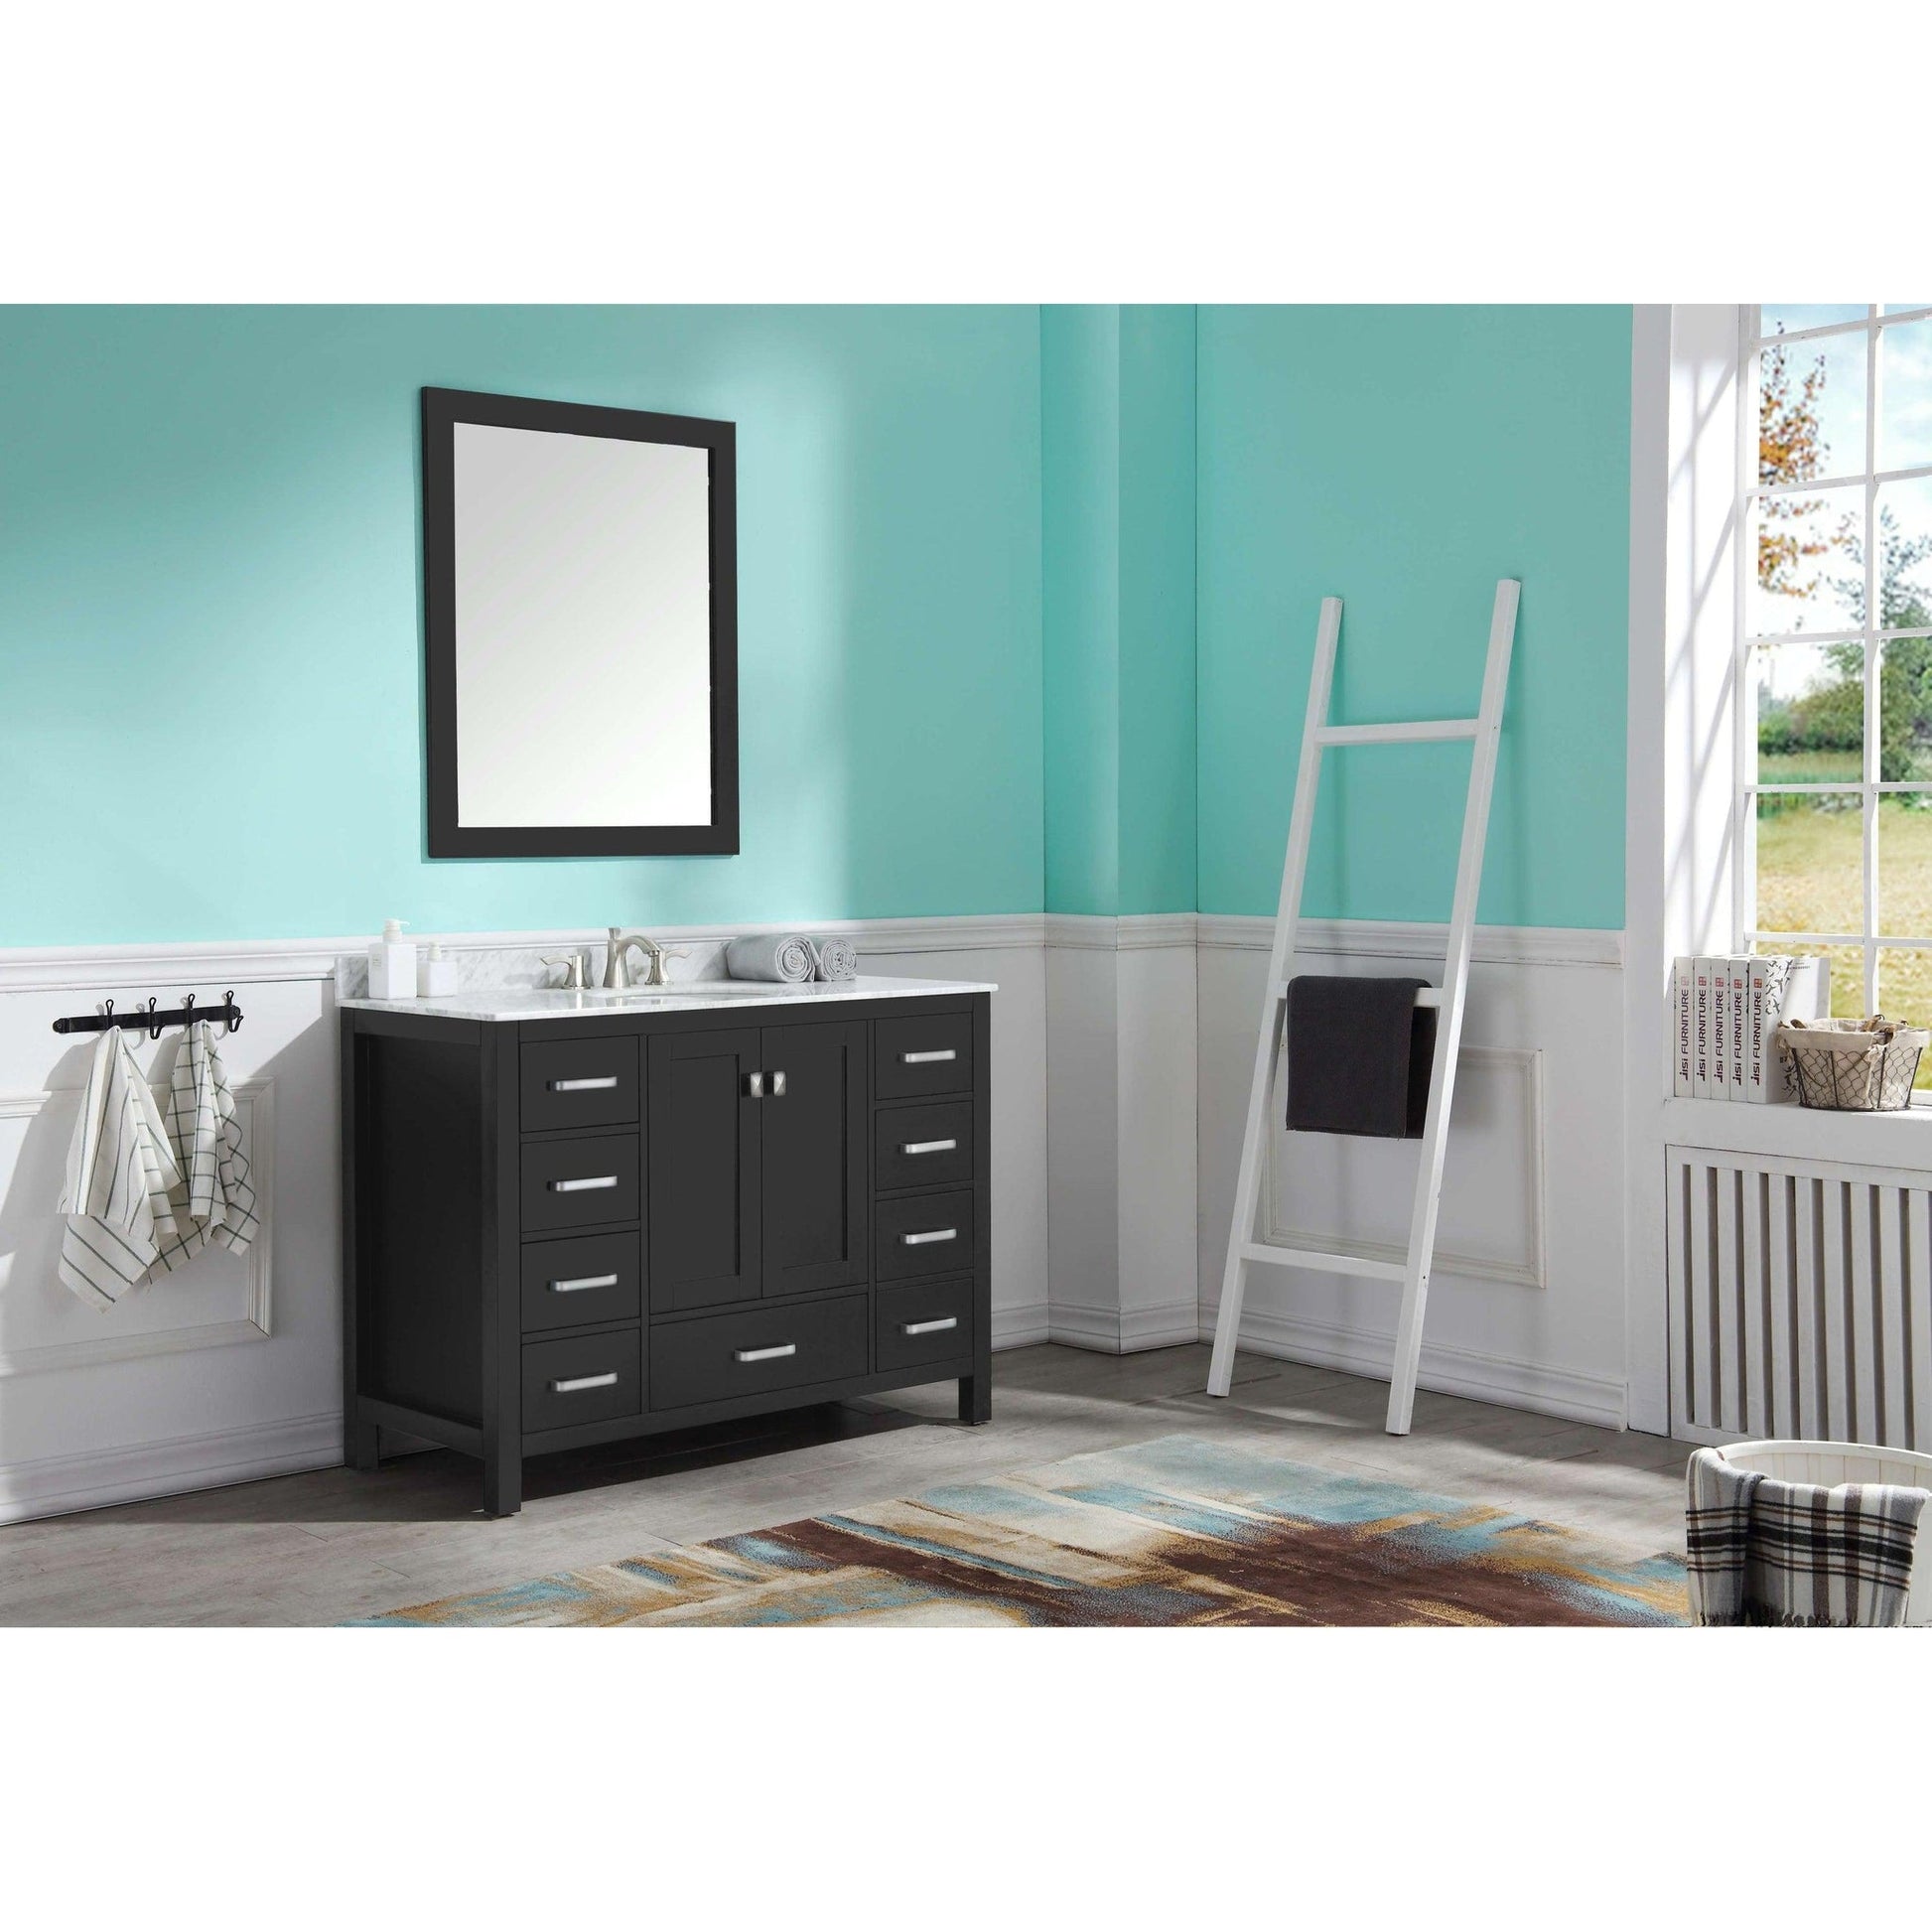 ANZZI Chateau Series 48" x 36" Rich Black Solid Wood Bathroom Vanity With White Carrara Marble Countertop, Basin Sink and Mirror